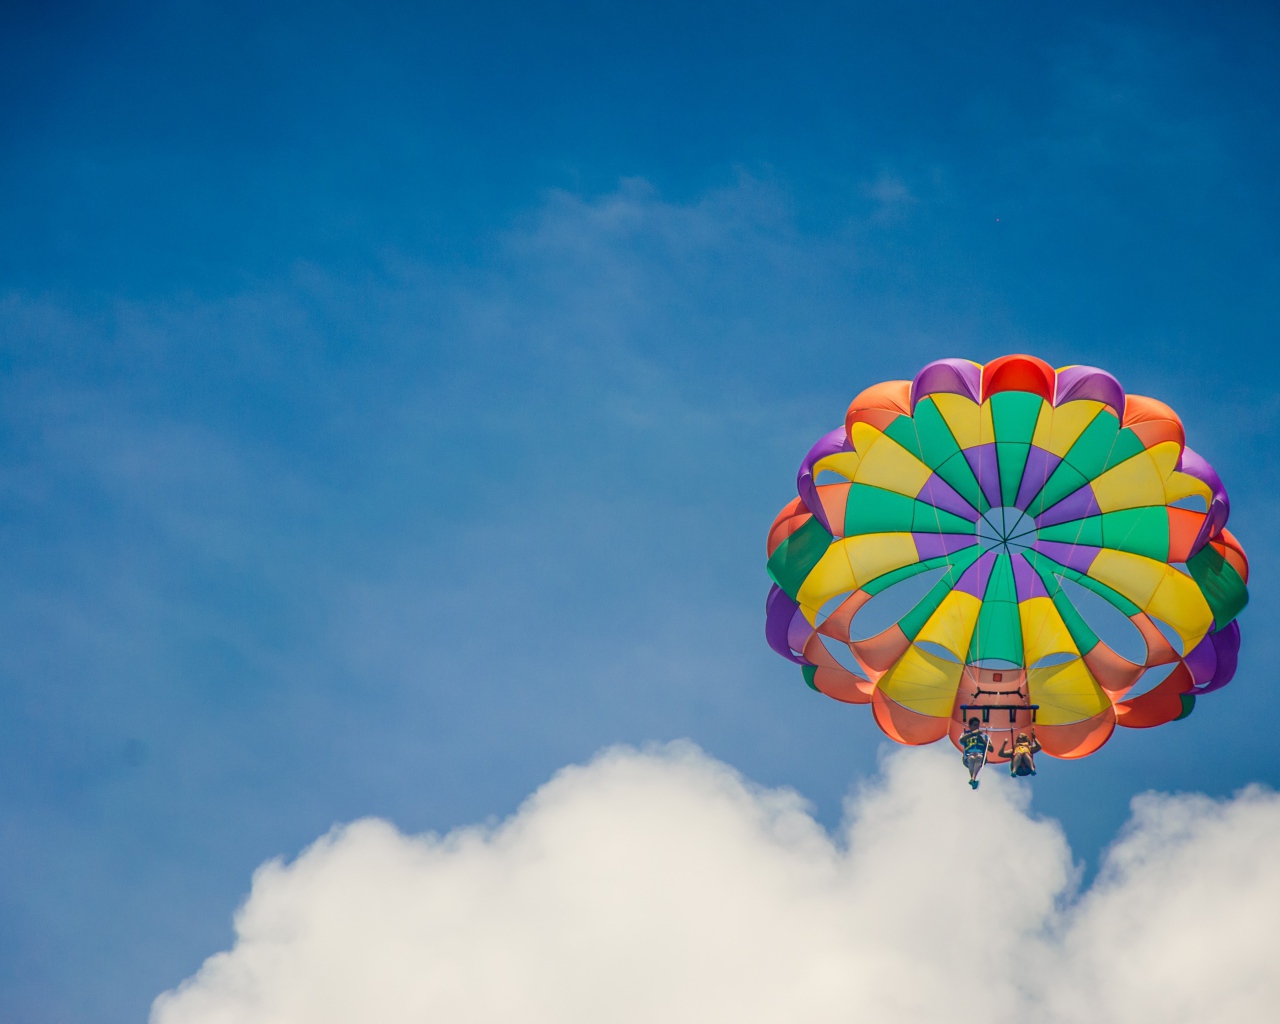 Parachute in the blue sky with white clouds